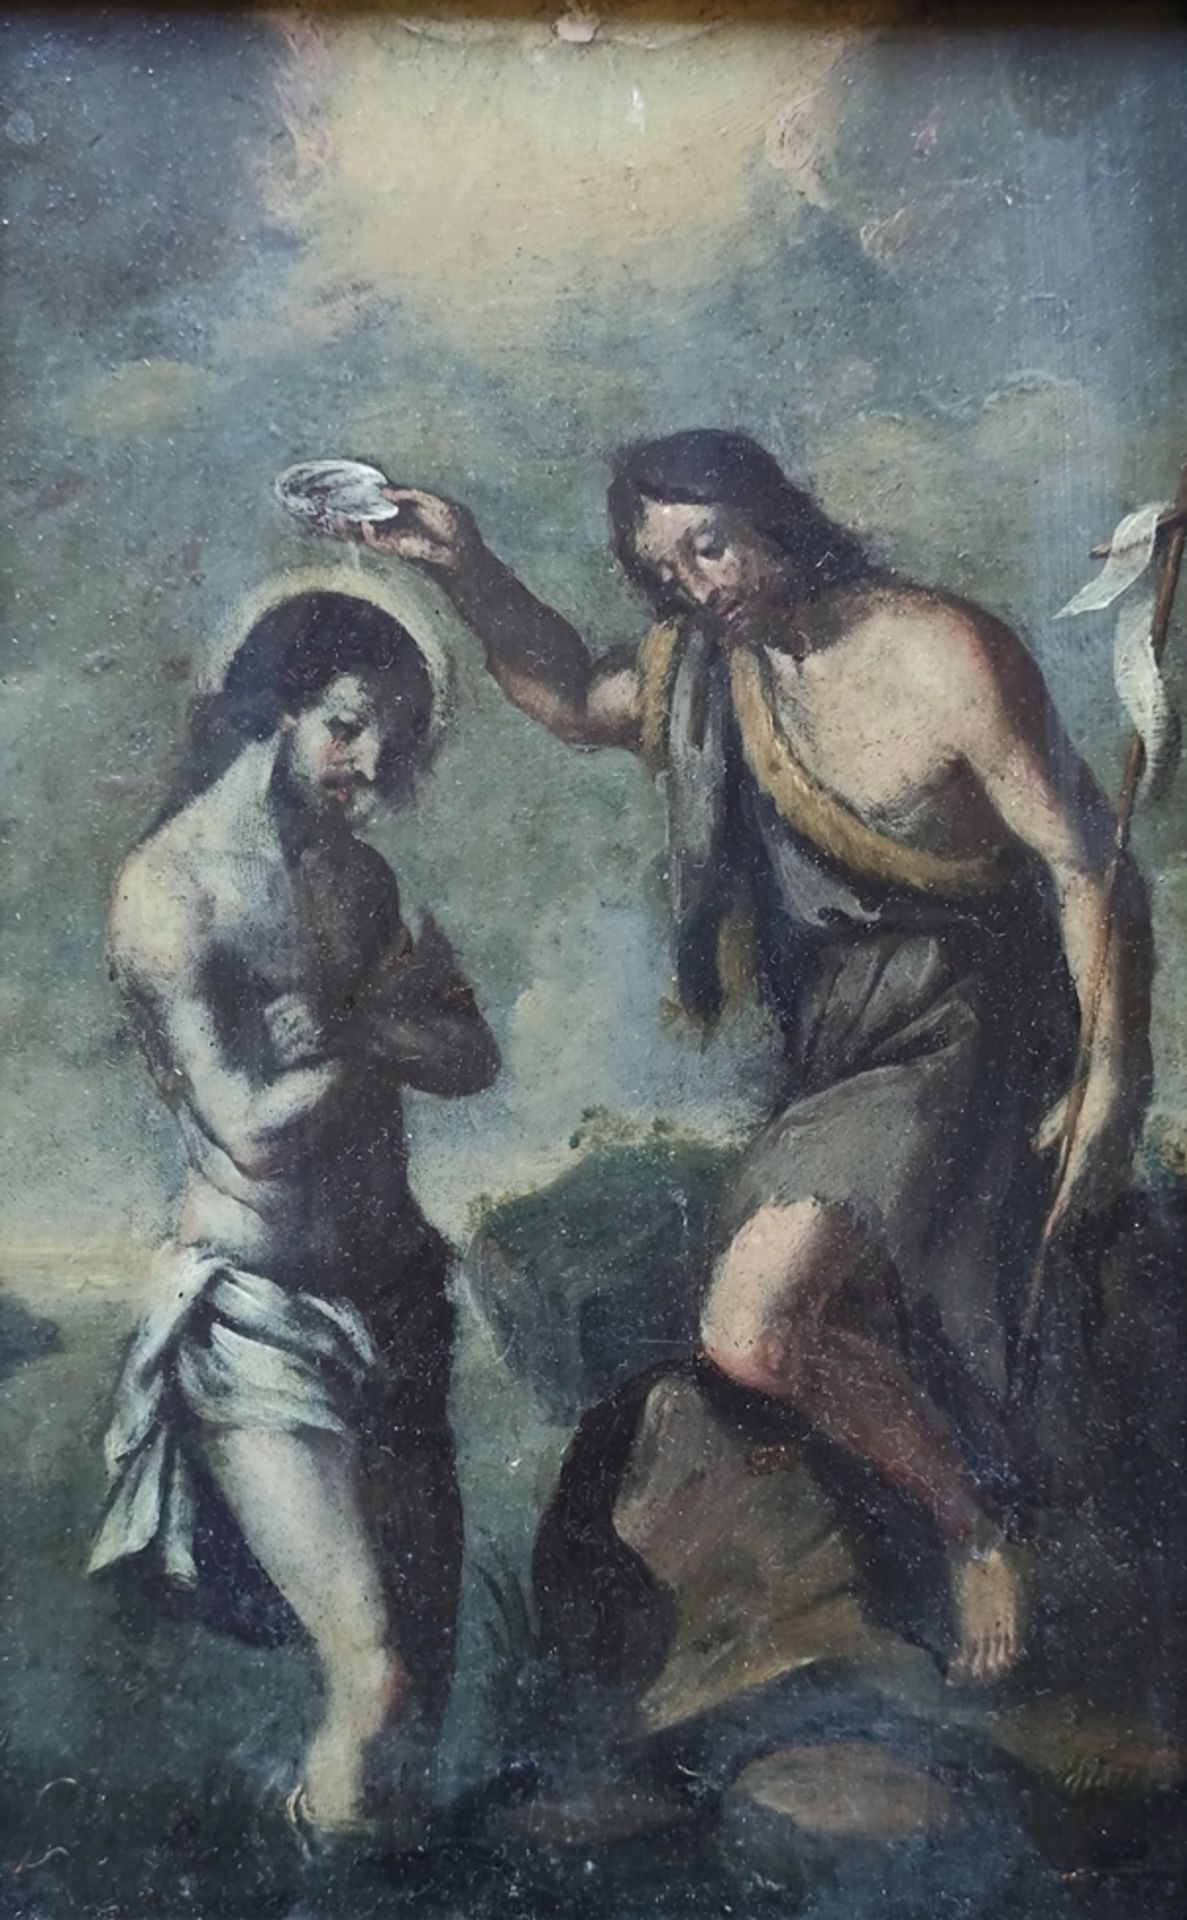 Baroque saint painter (17th century) "Baptism of Christ", with John the Baptist at the riverbed of 